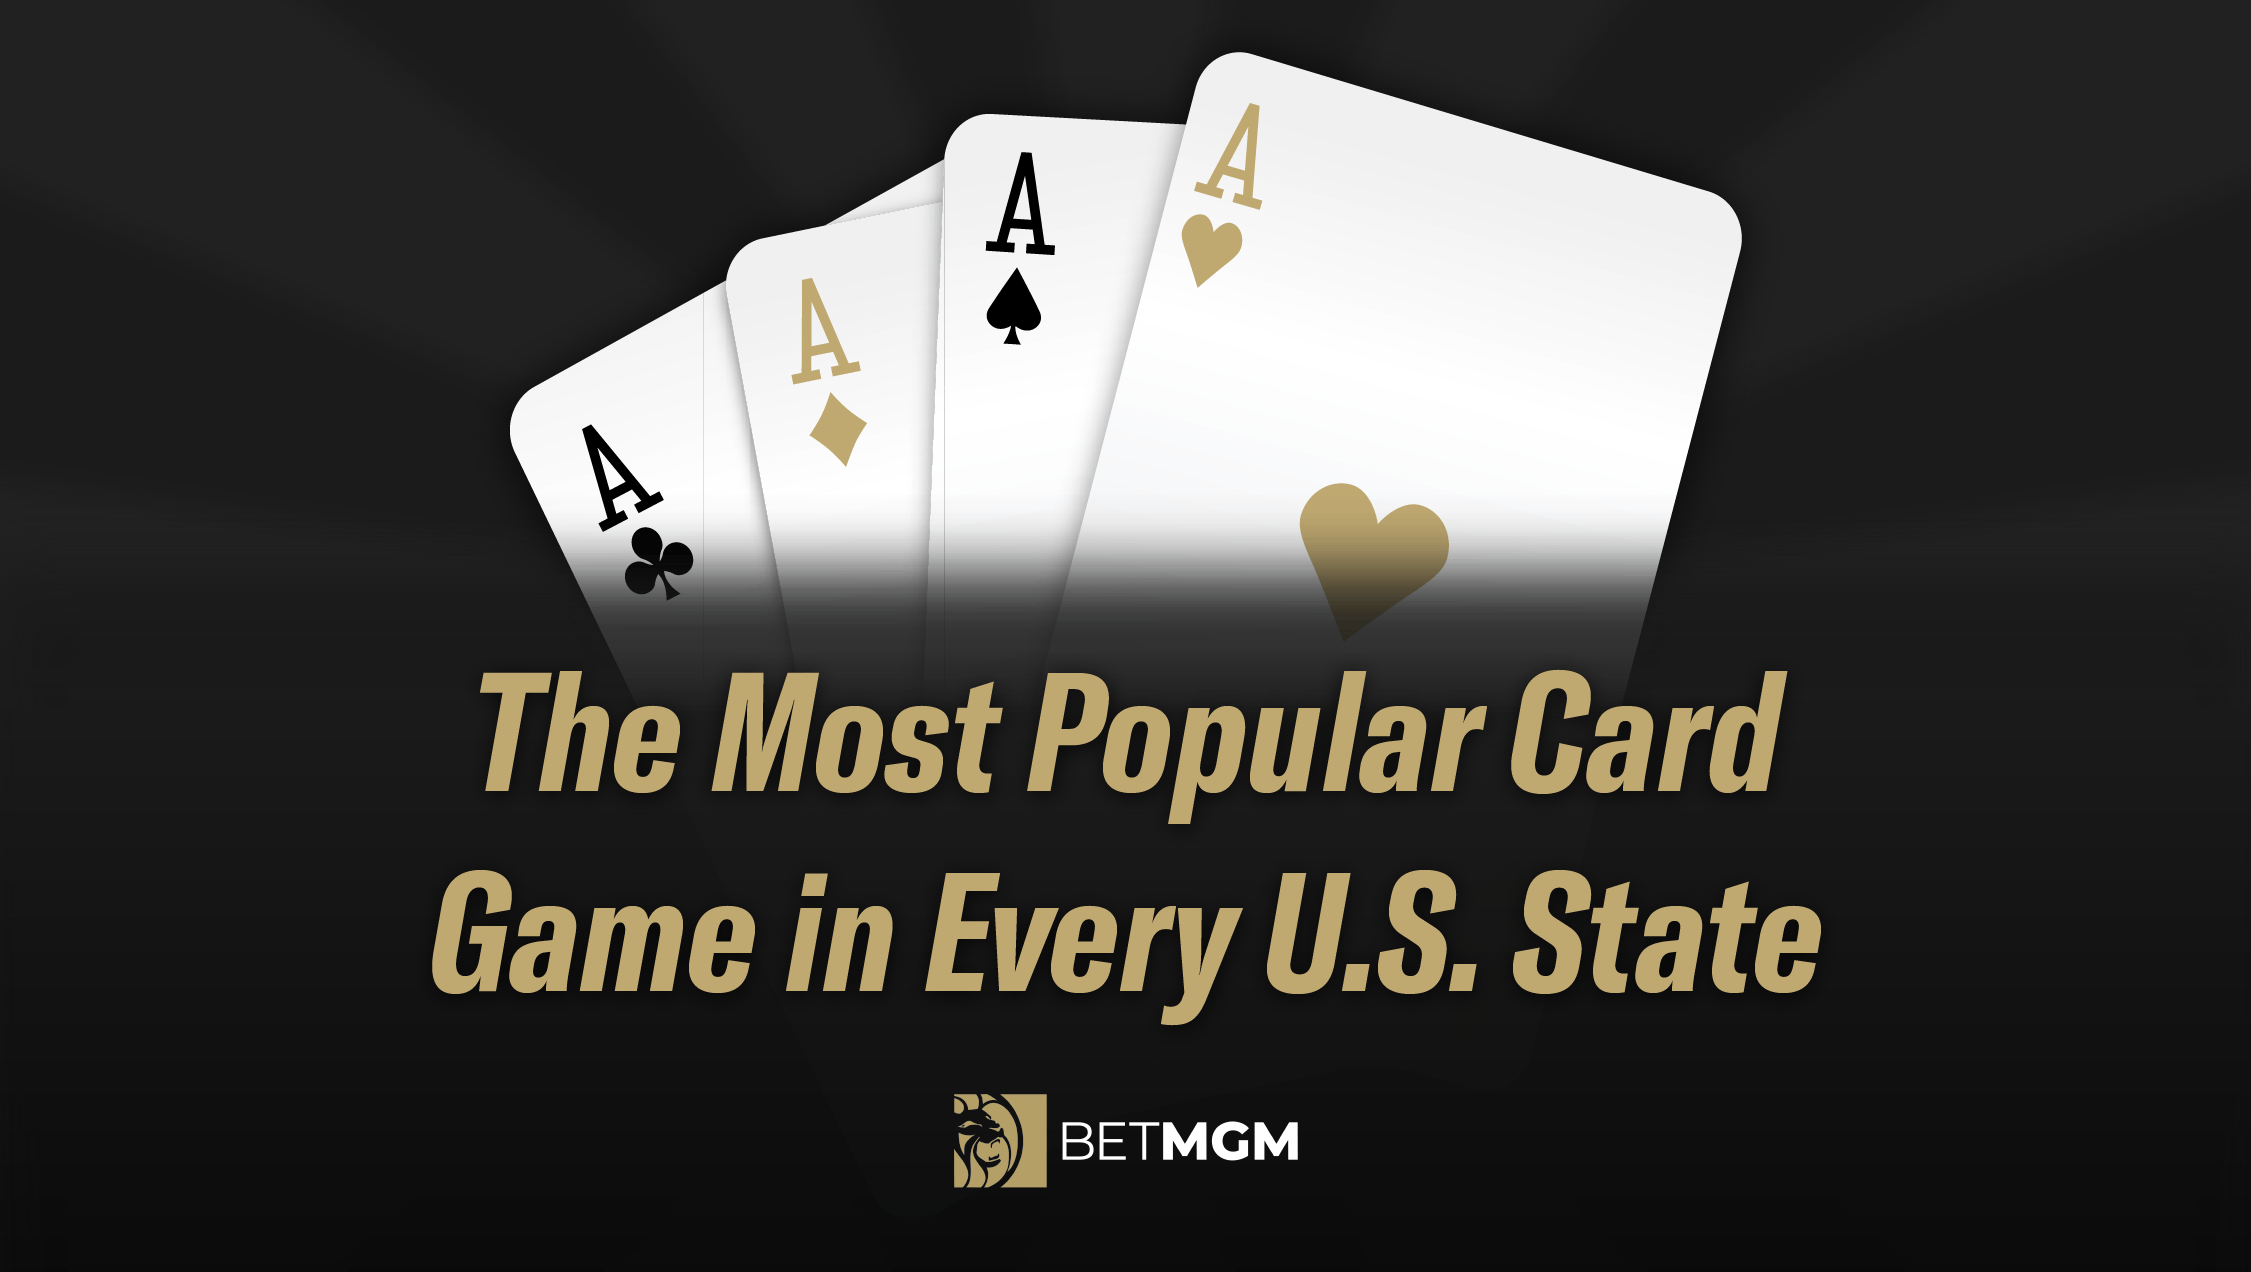 A header image for a blog about card game popularity around the U.S.